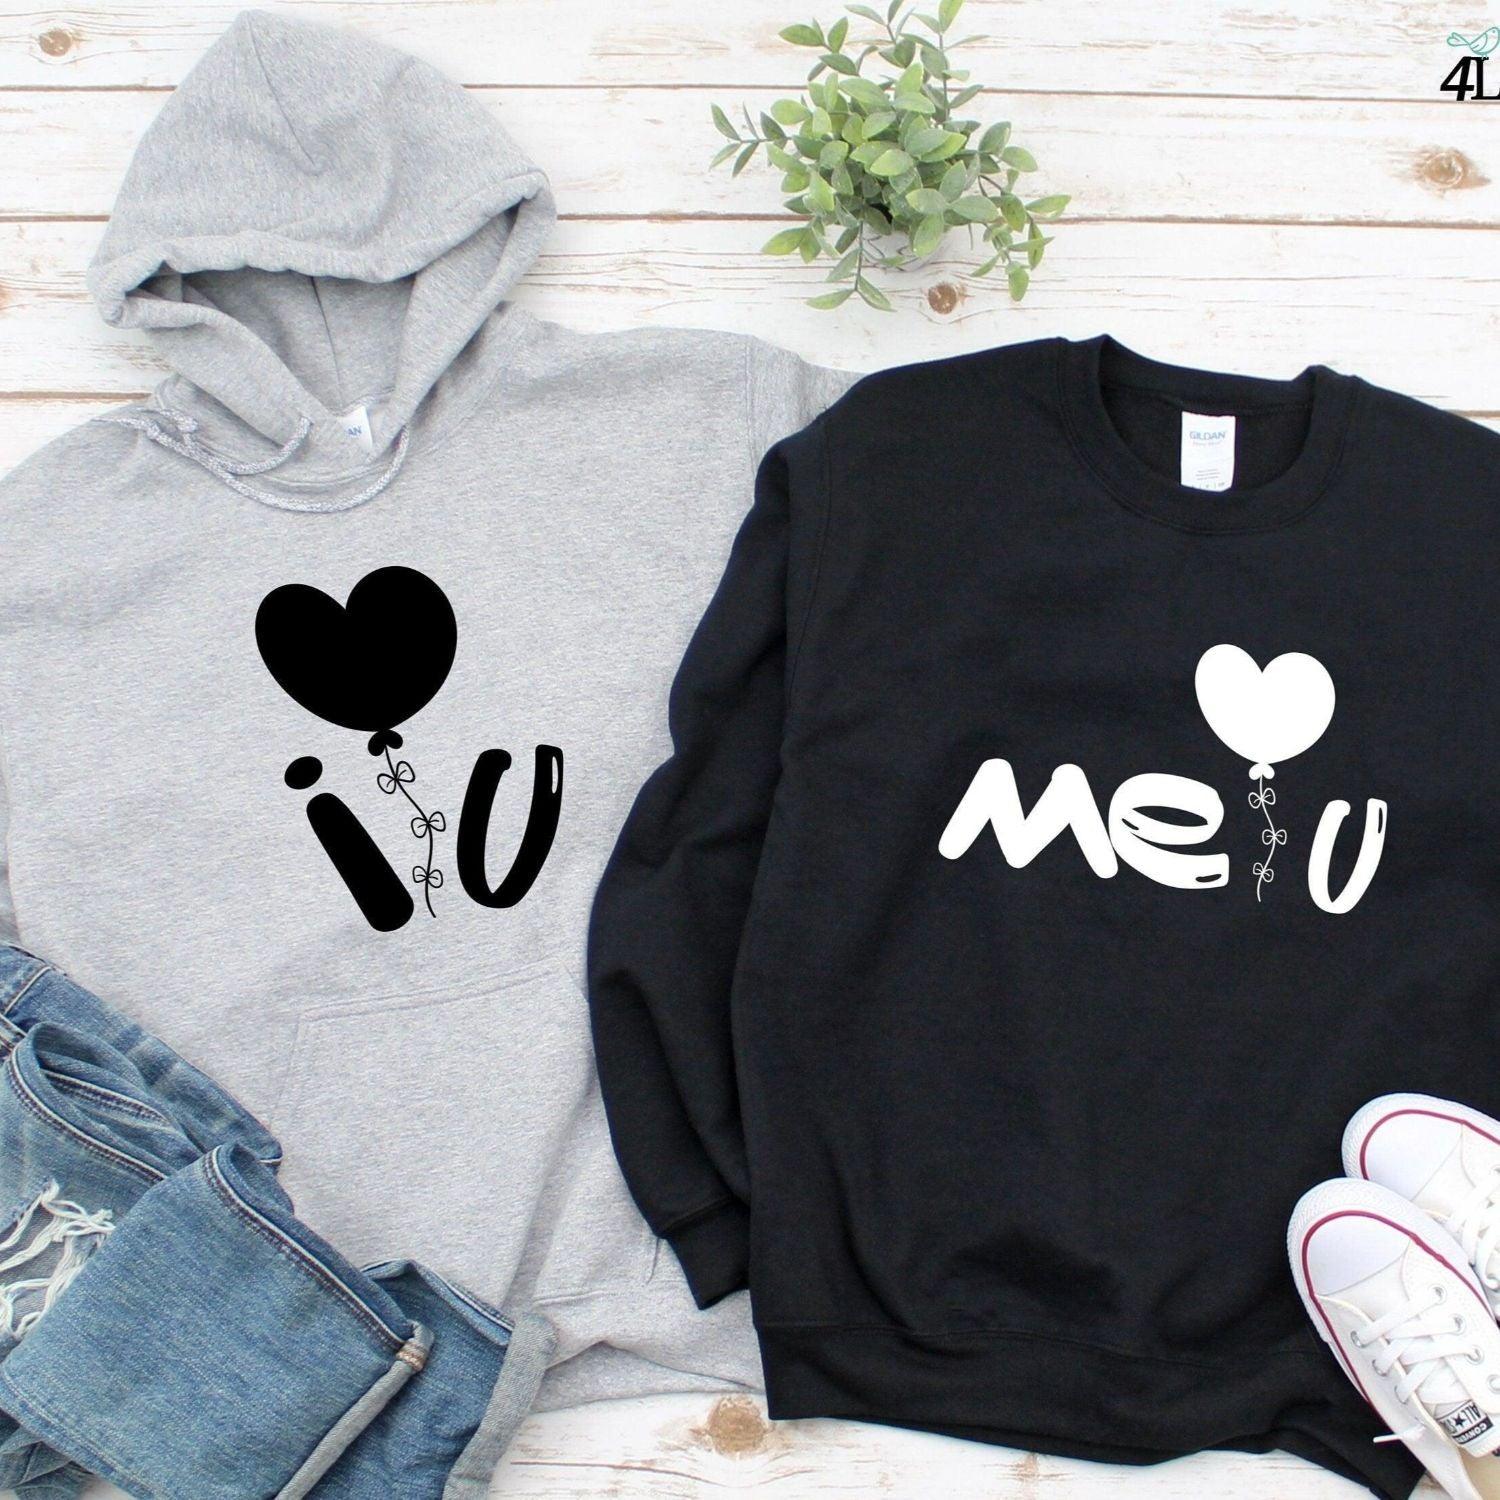 Stay In Style - 'I ❤️ You & Me ❤️' Matching Outfits for Couples. A Gift Of Love! - 4Lovebirds